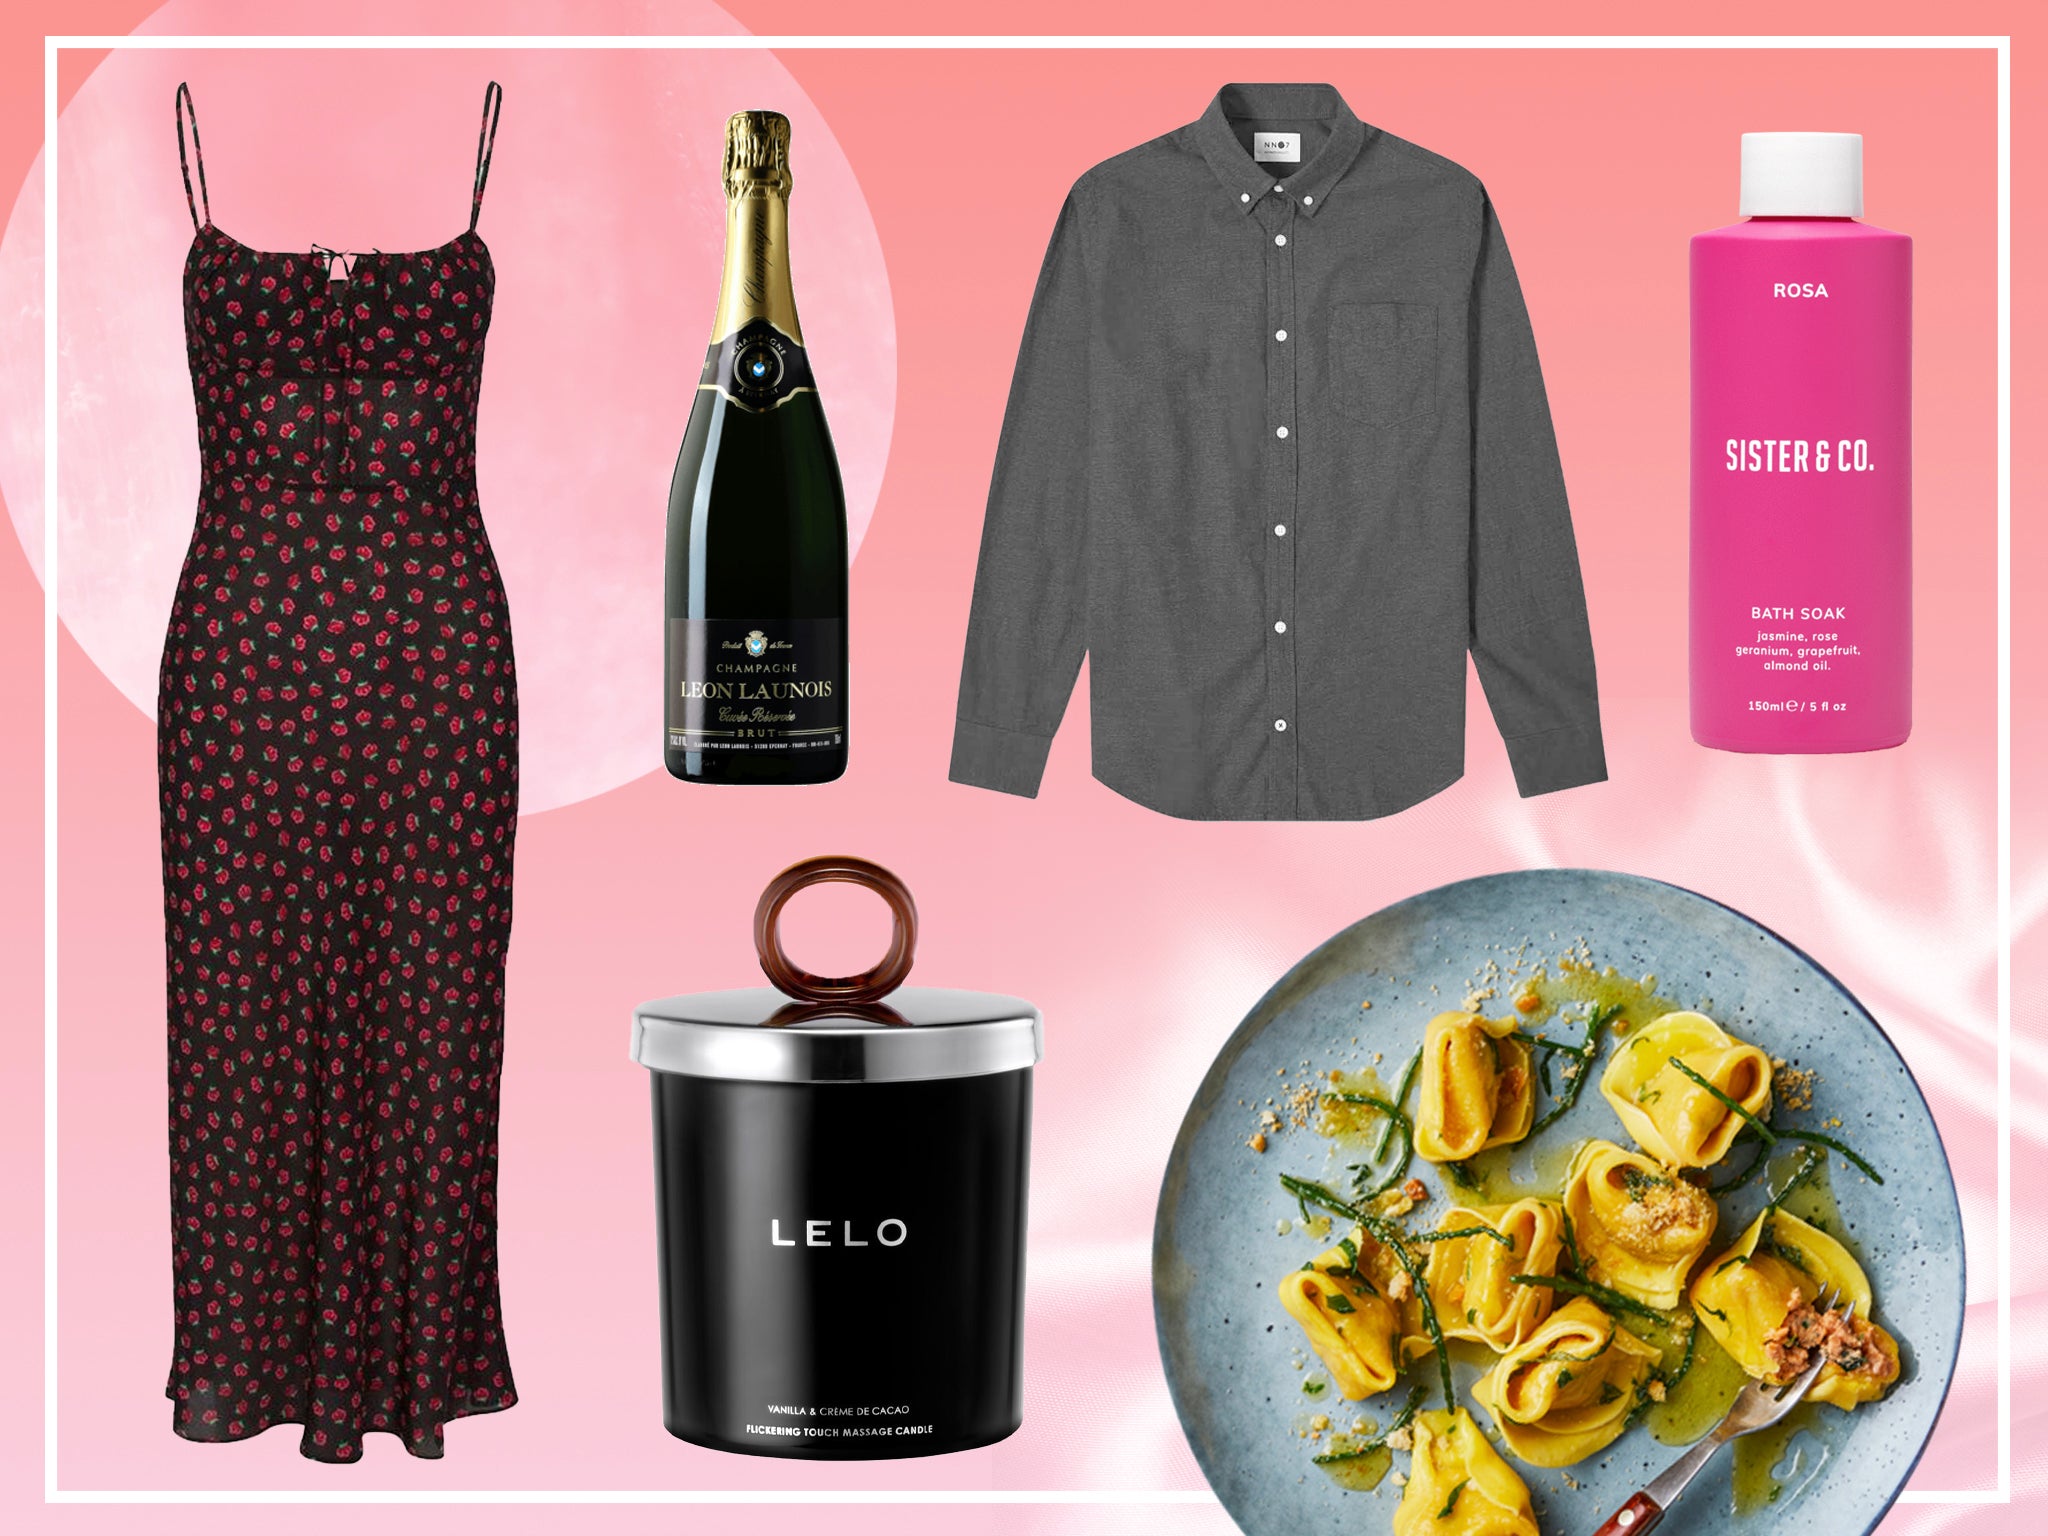 We think nothing says romance like a bowl of pasta and a bottle of fizz